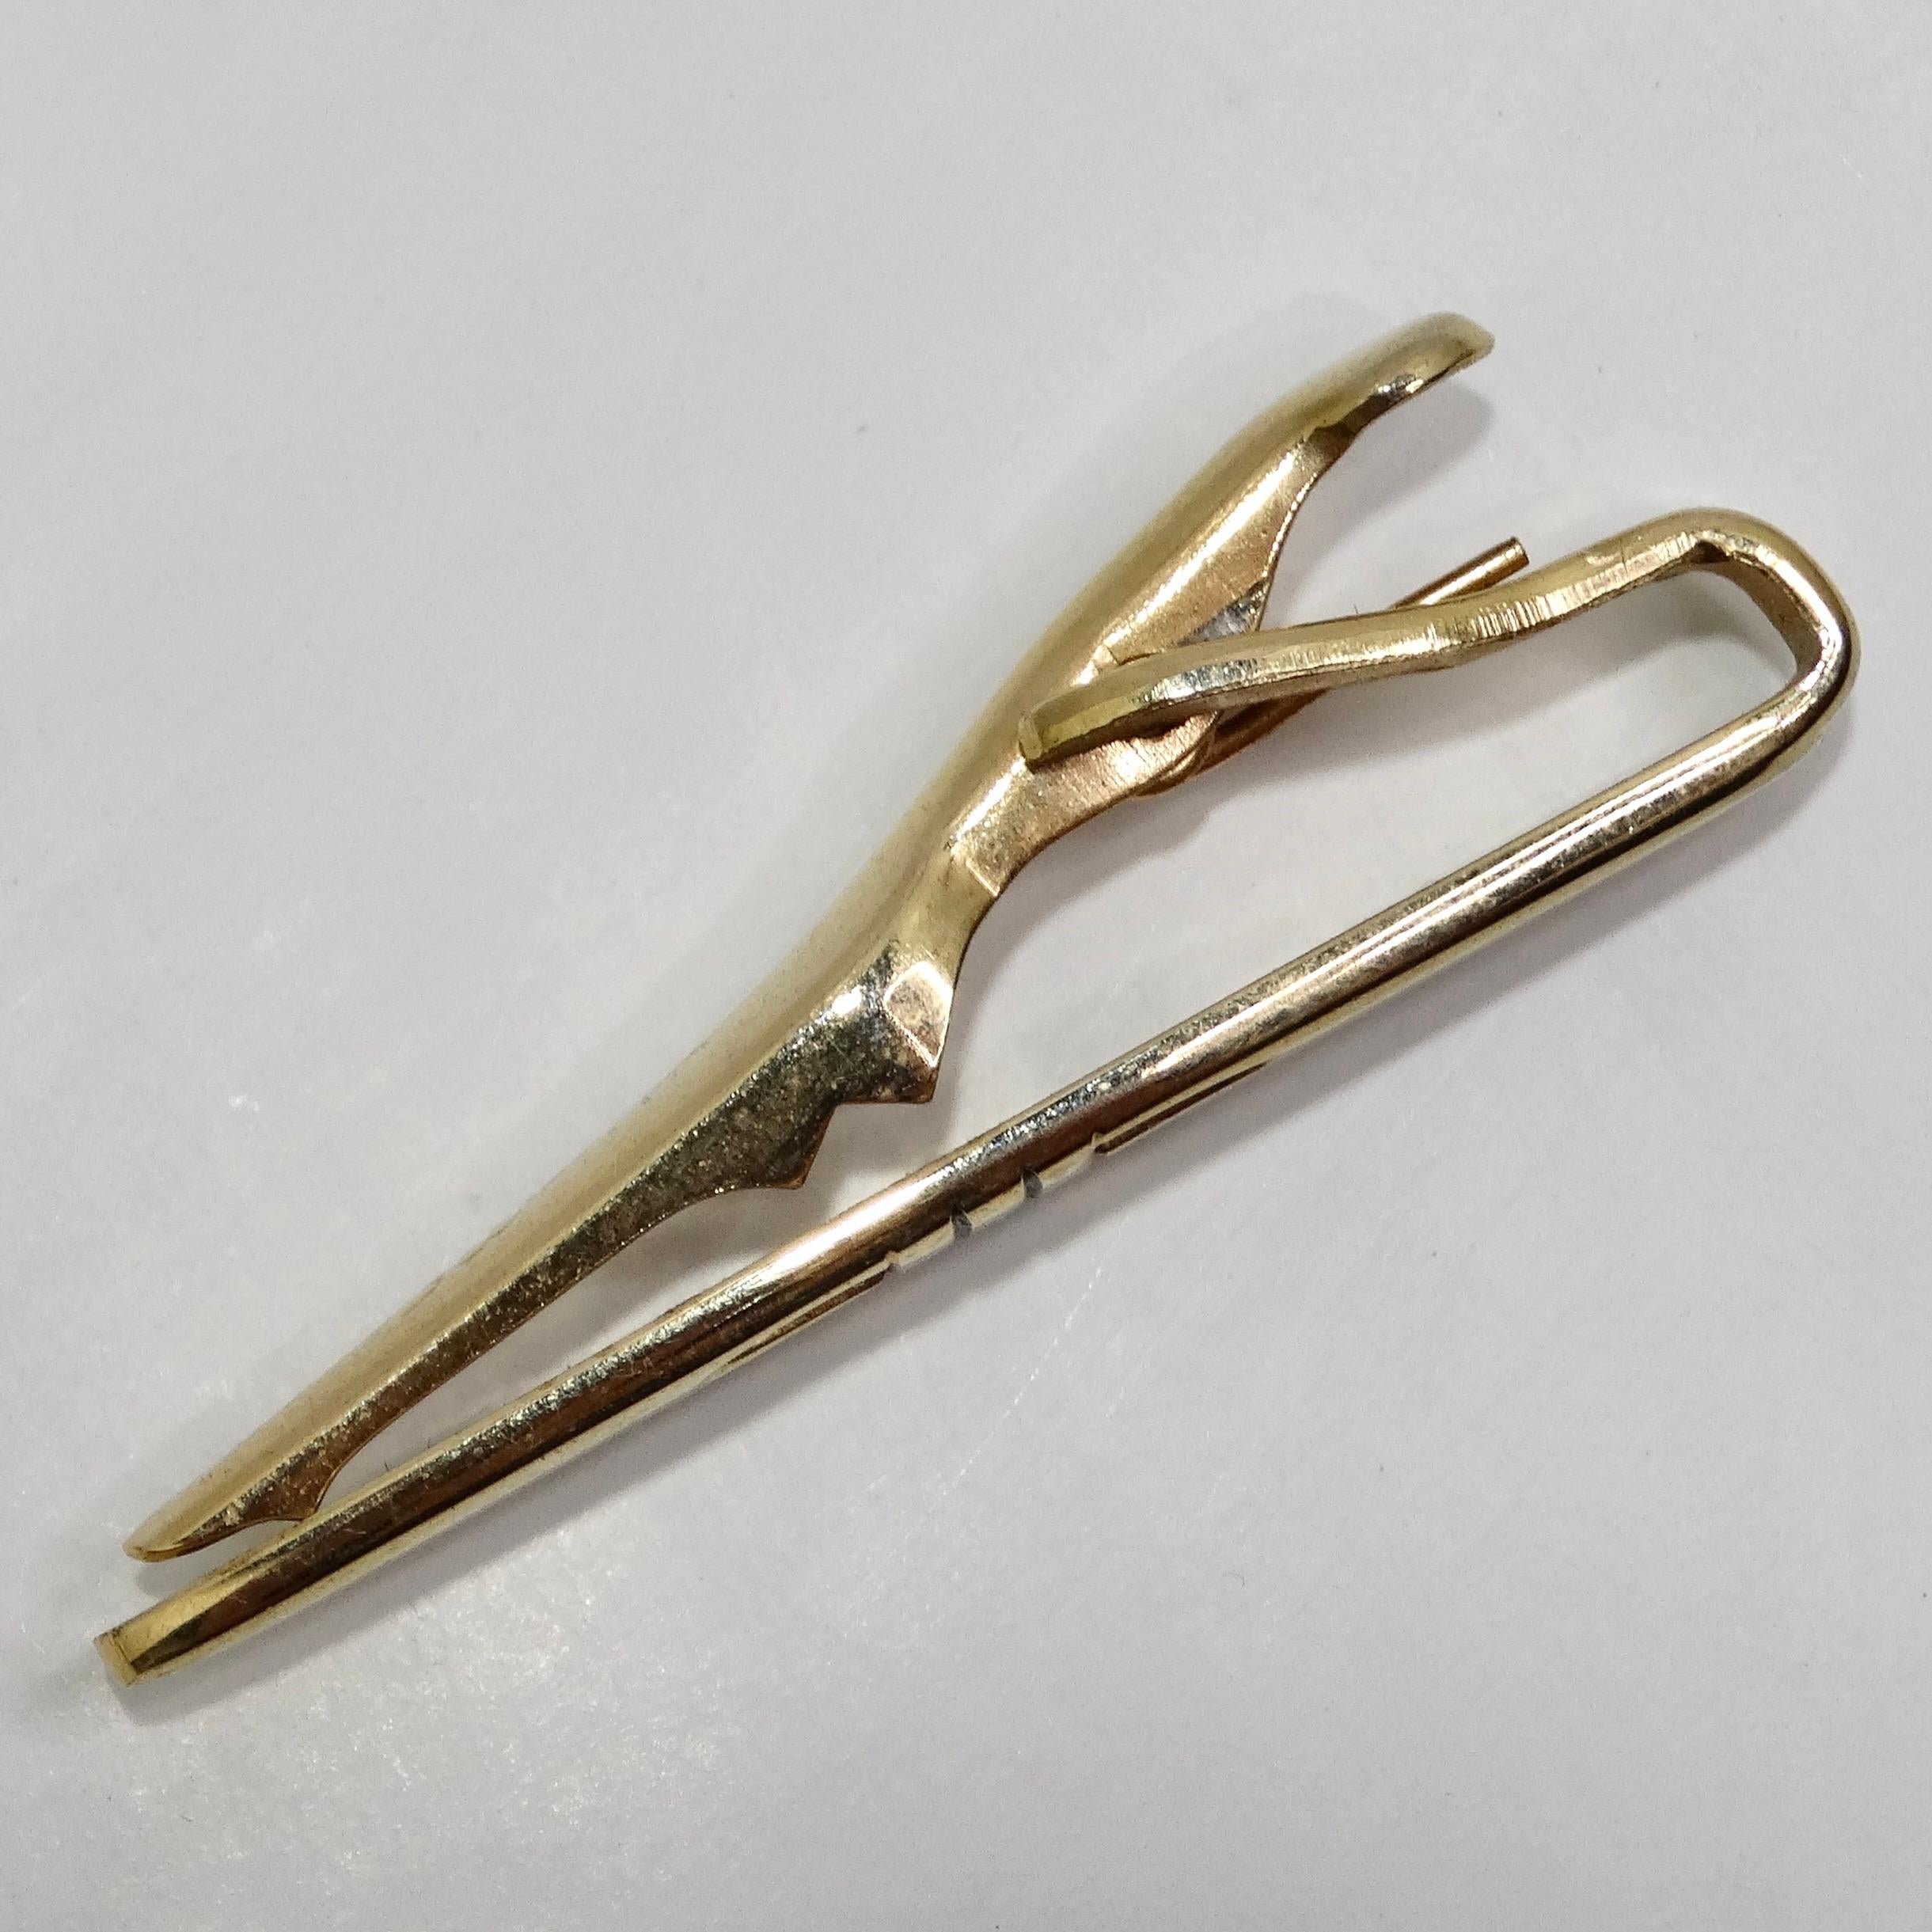 Swank 18K Gold Plated Vintage Cuff Links and Tie Clip Set In Good Condition For Sale In Scottsdale, AZ